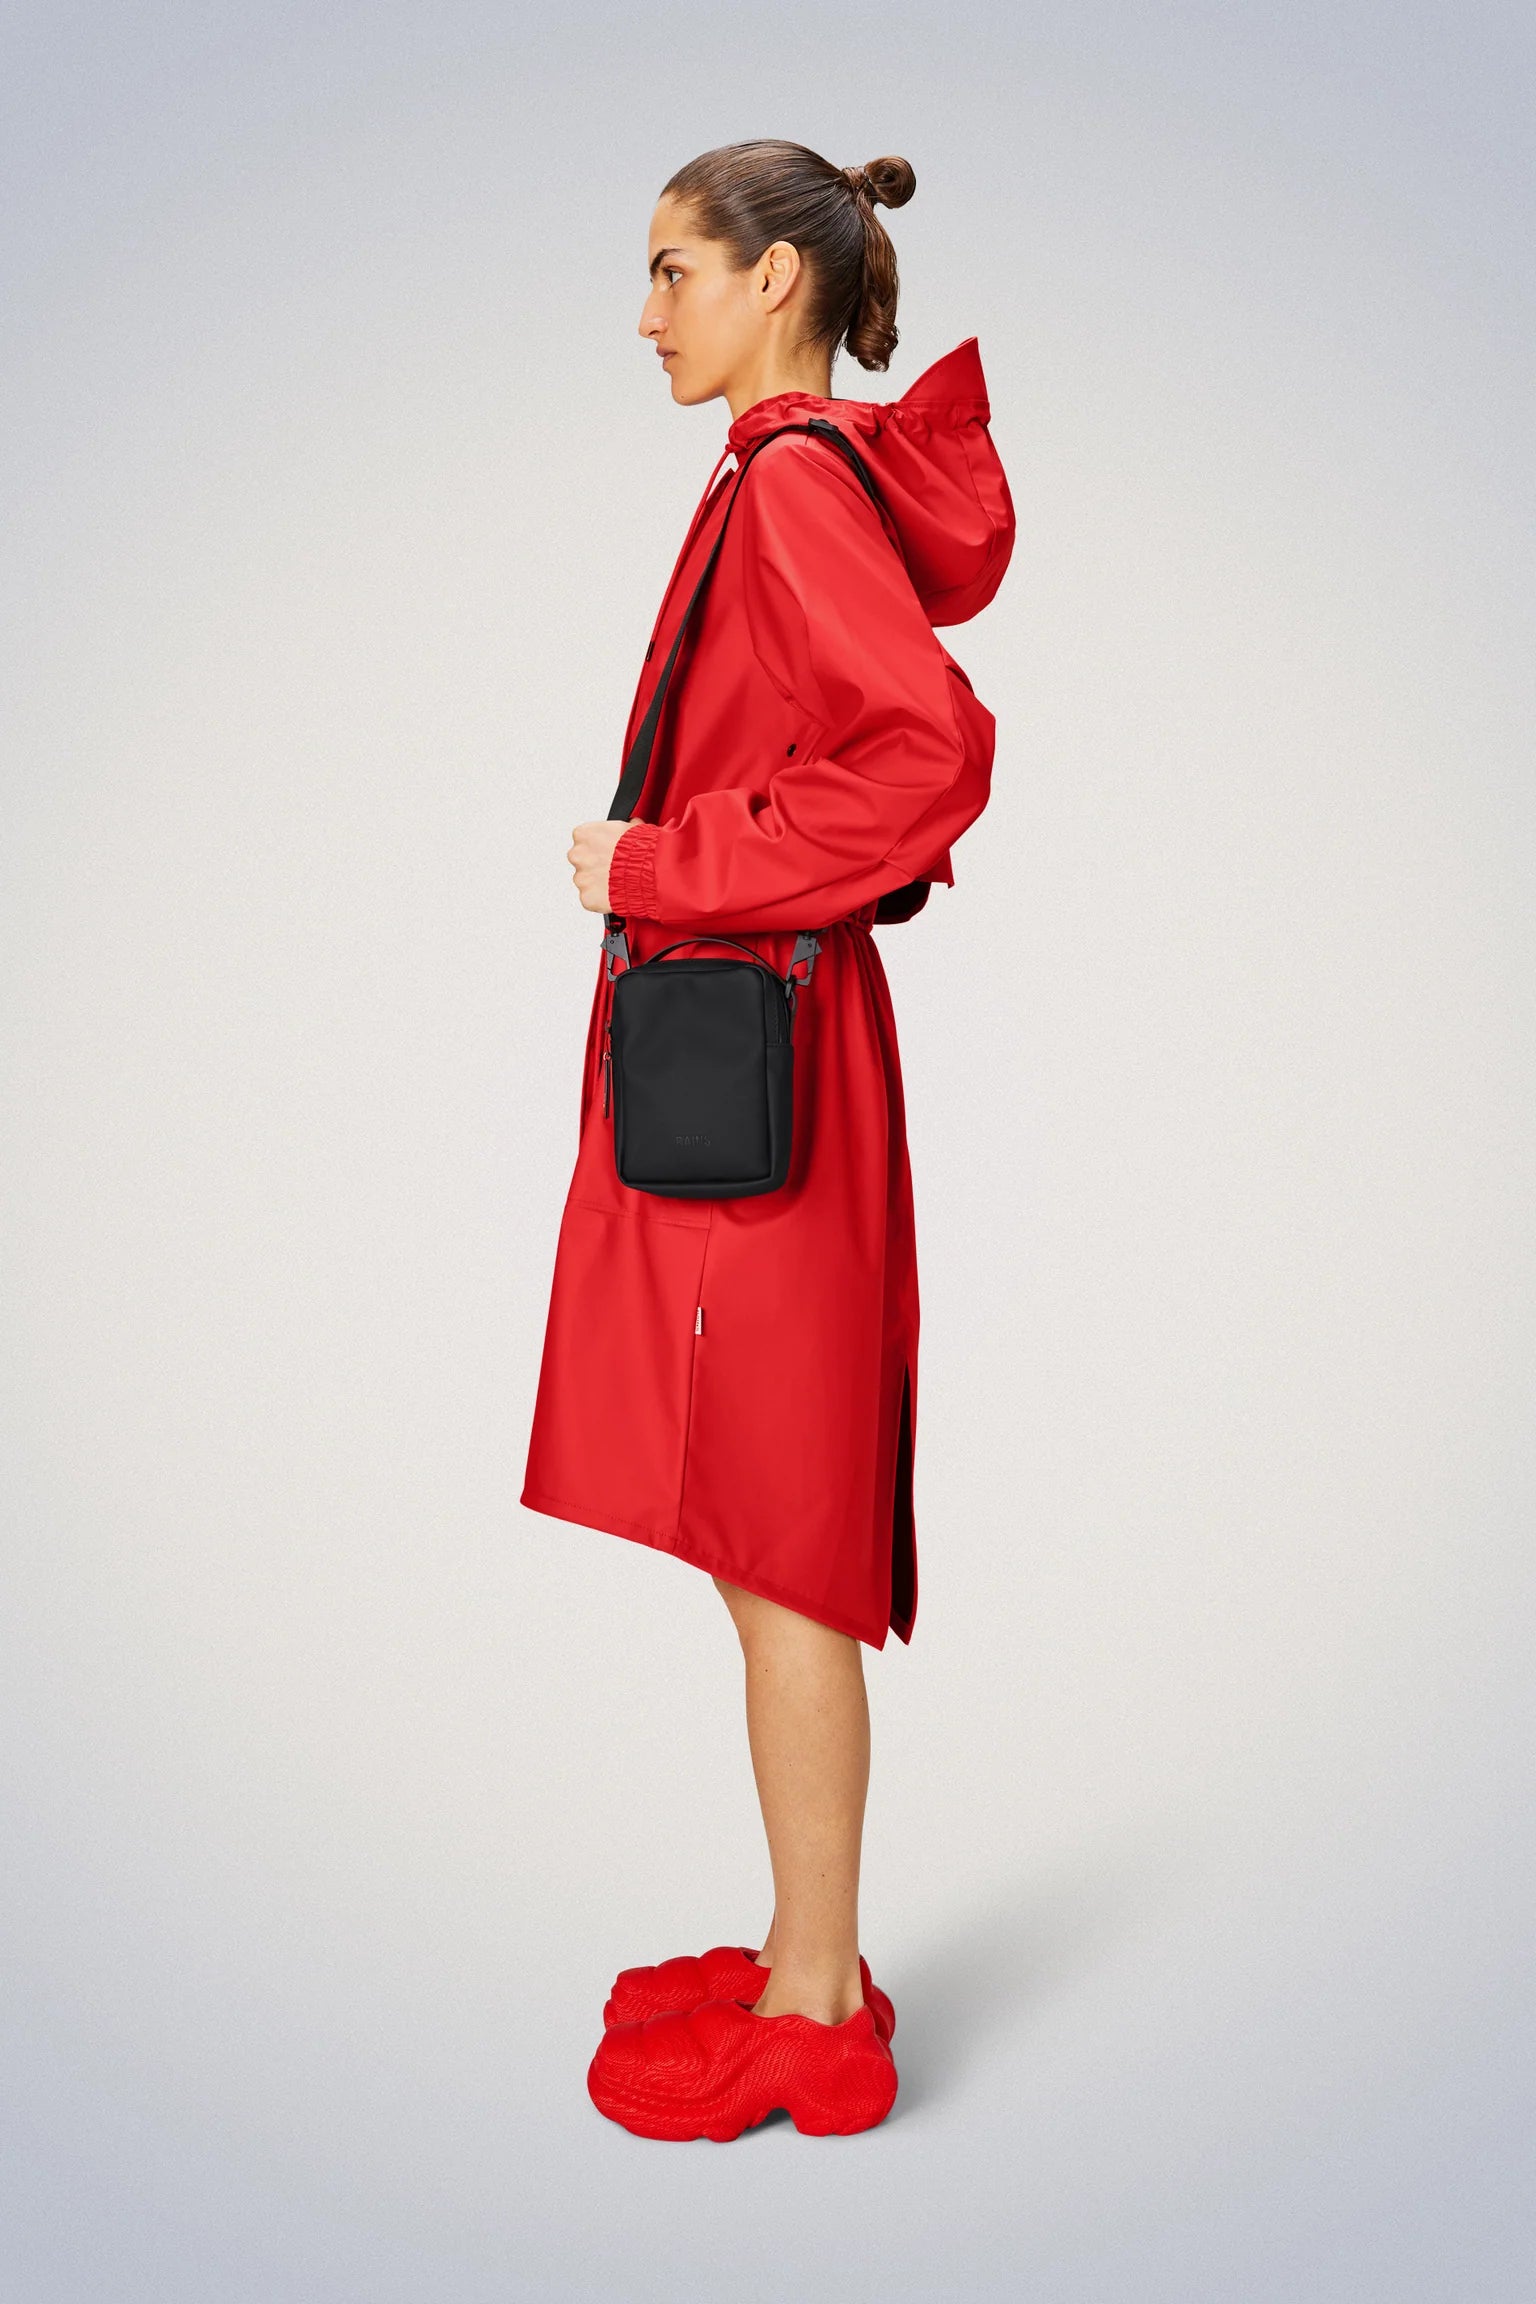 A woman, donning a red raincoat made from Rains' signature waterproof PU fabric, walks confidently with her matching Rains Reporter Box Bag.